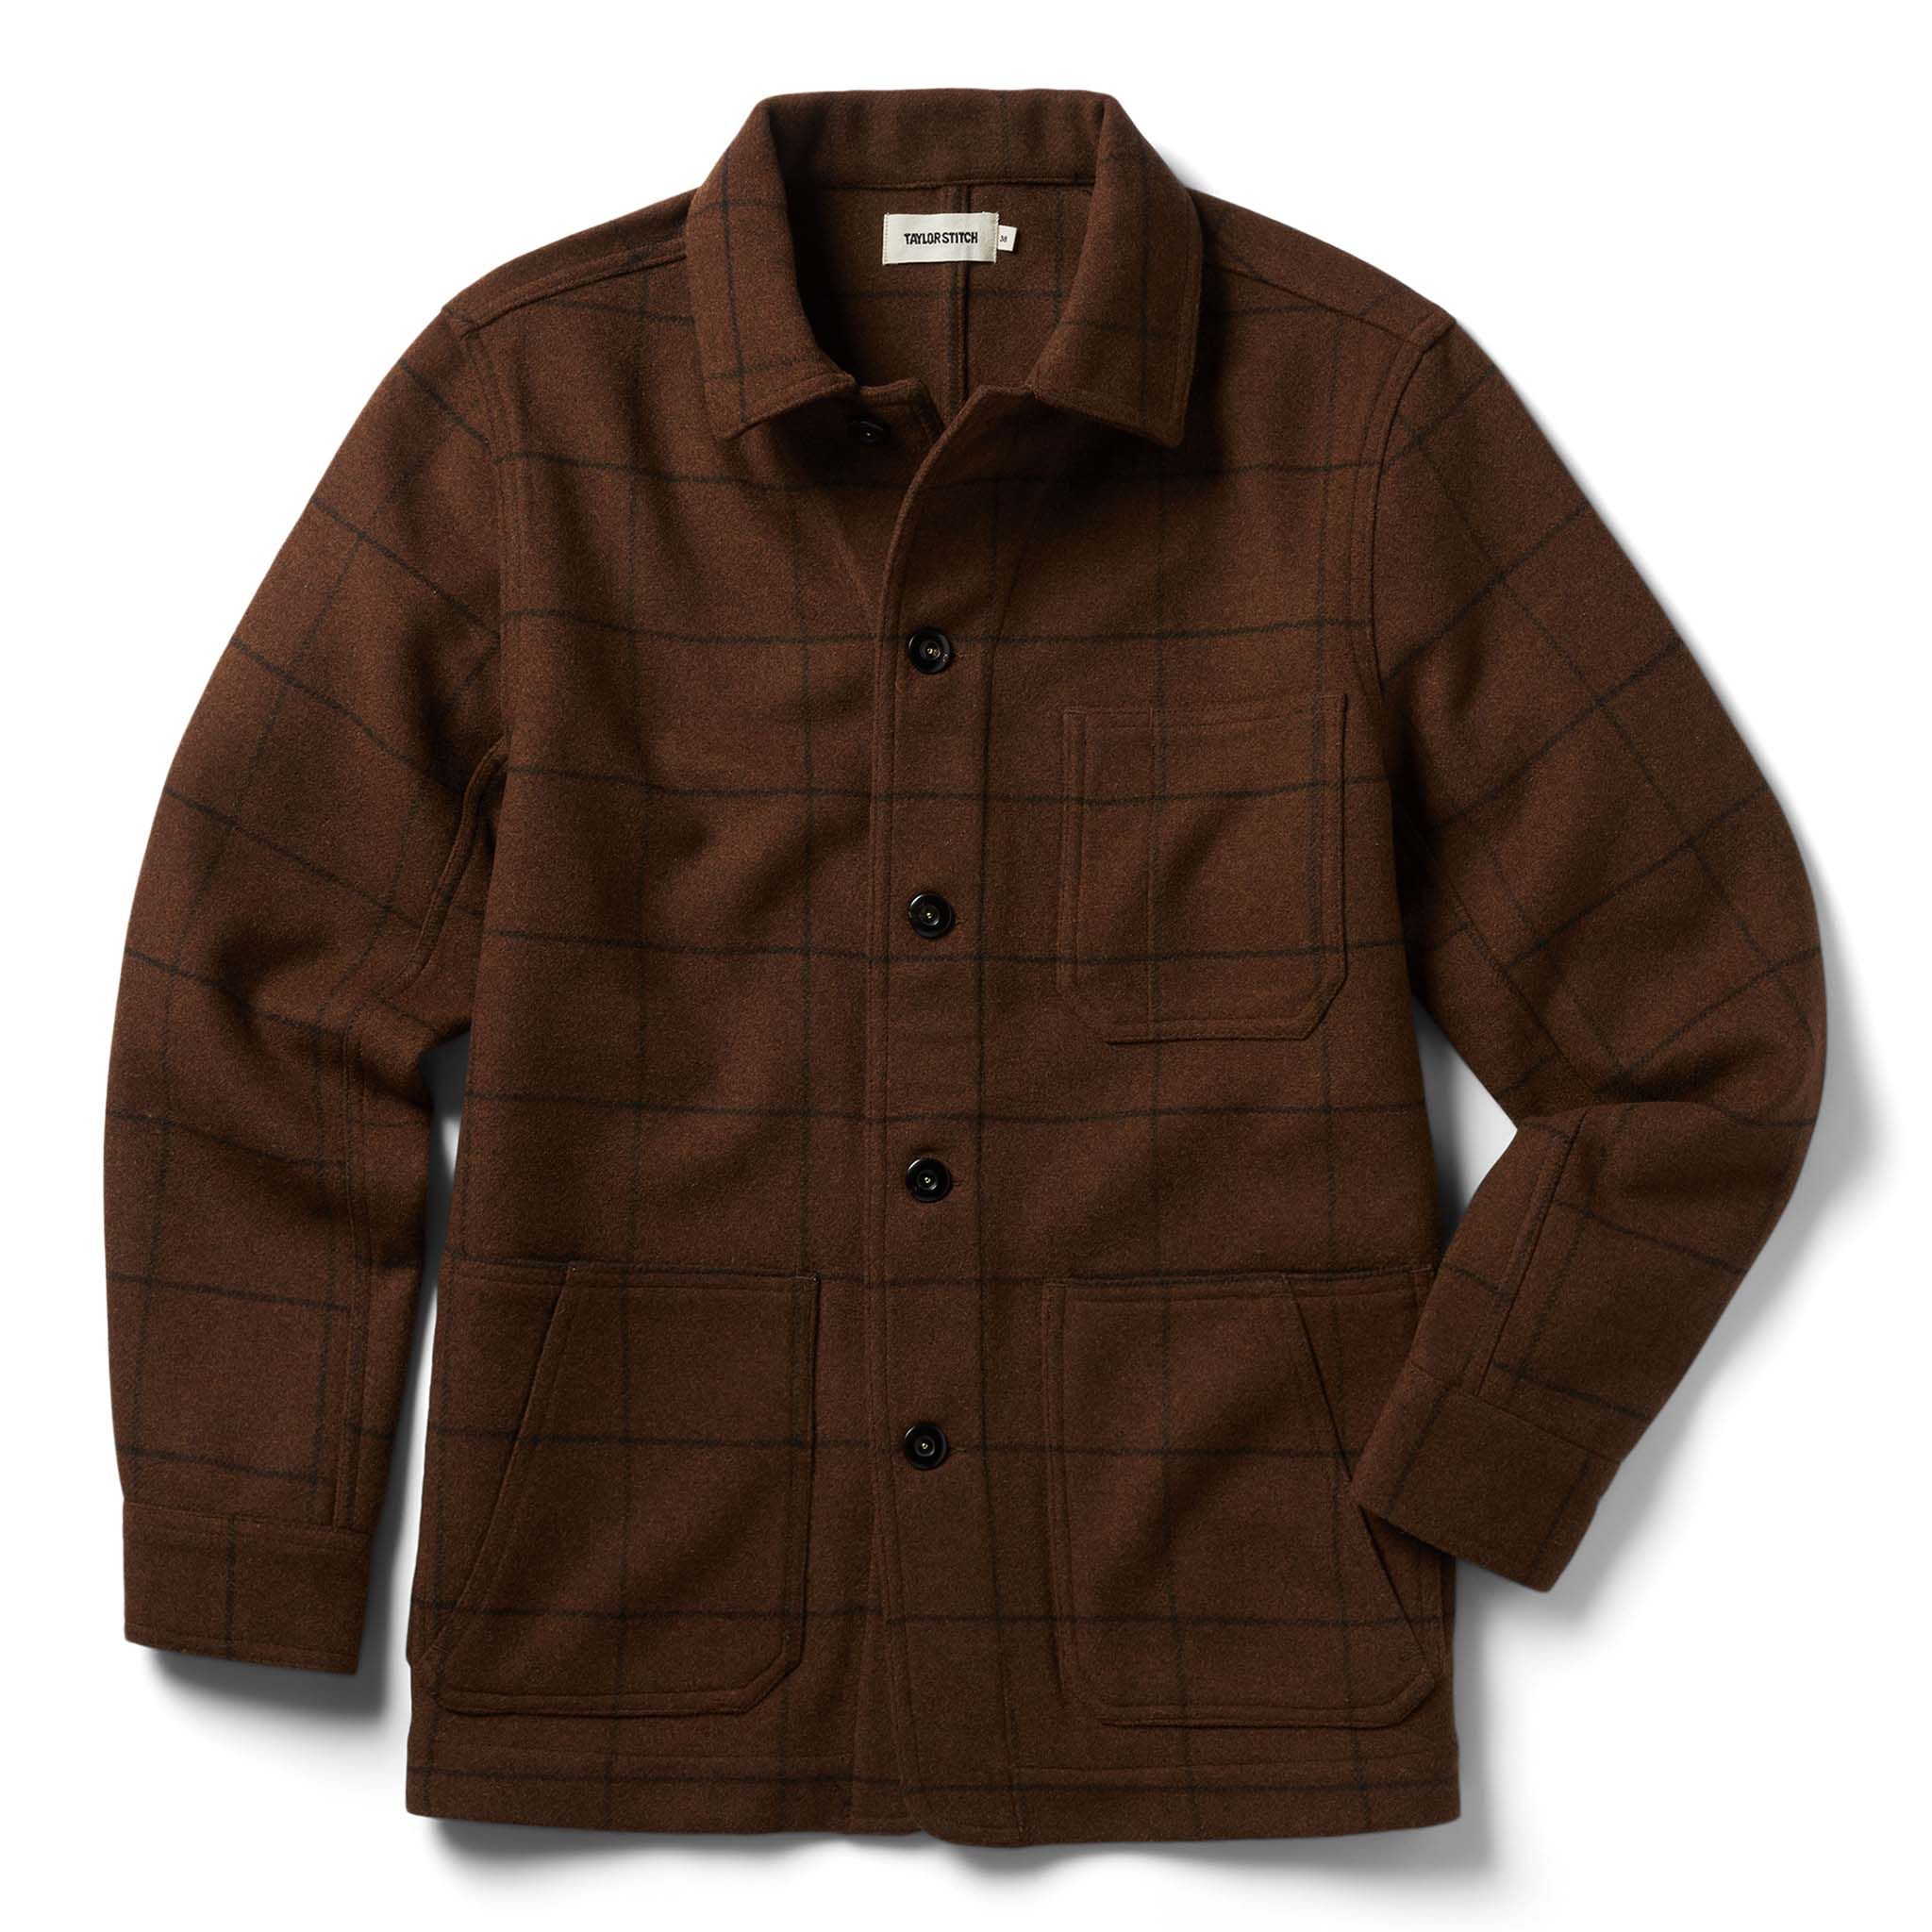 The Ojai Jacket in Ginger Check Wool